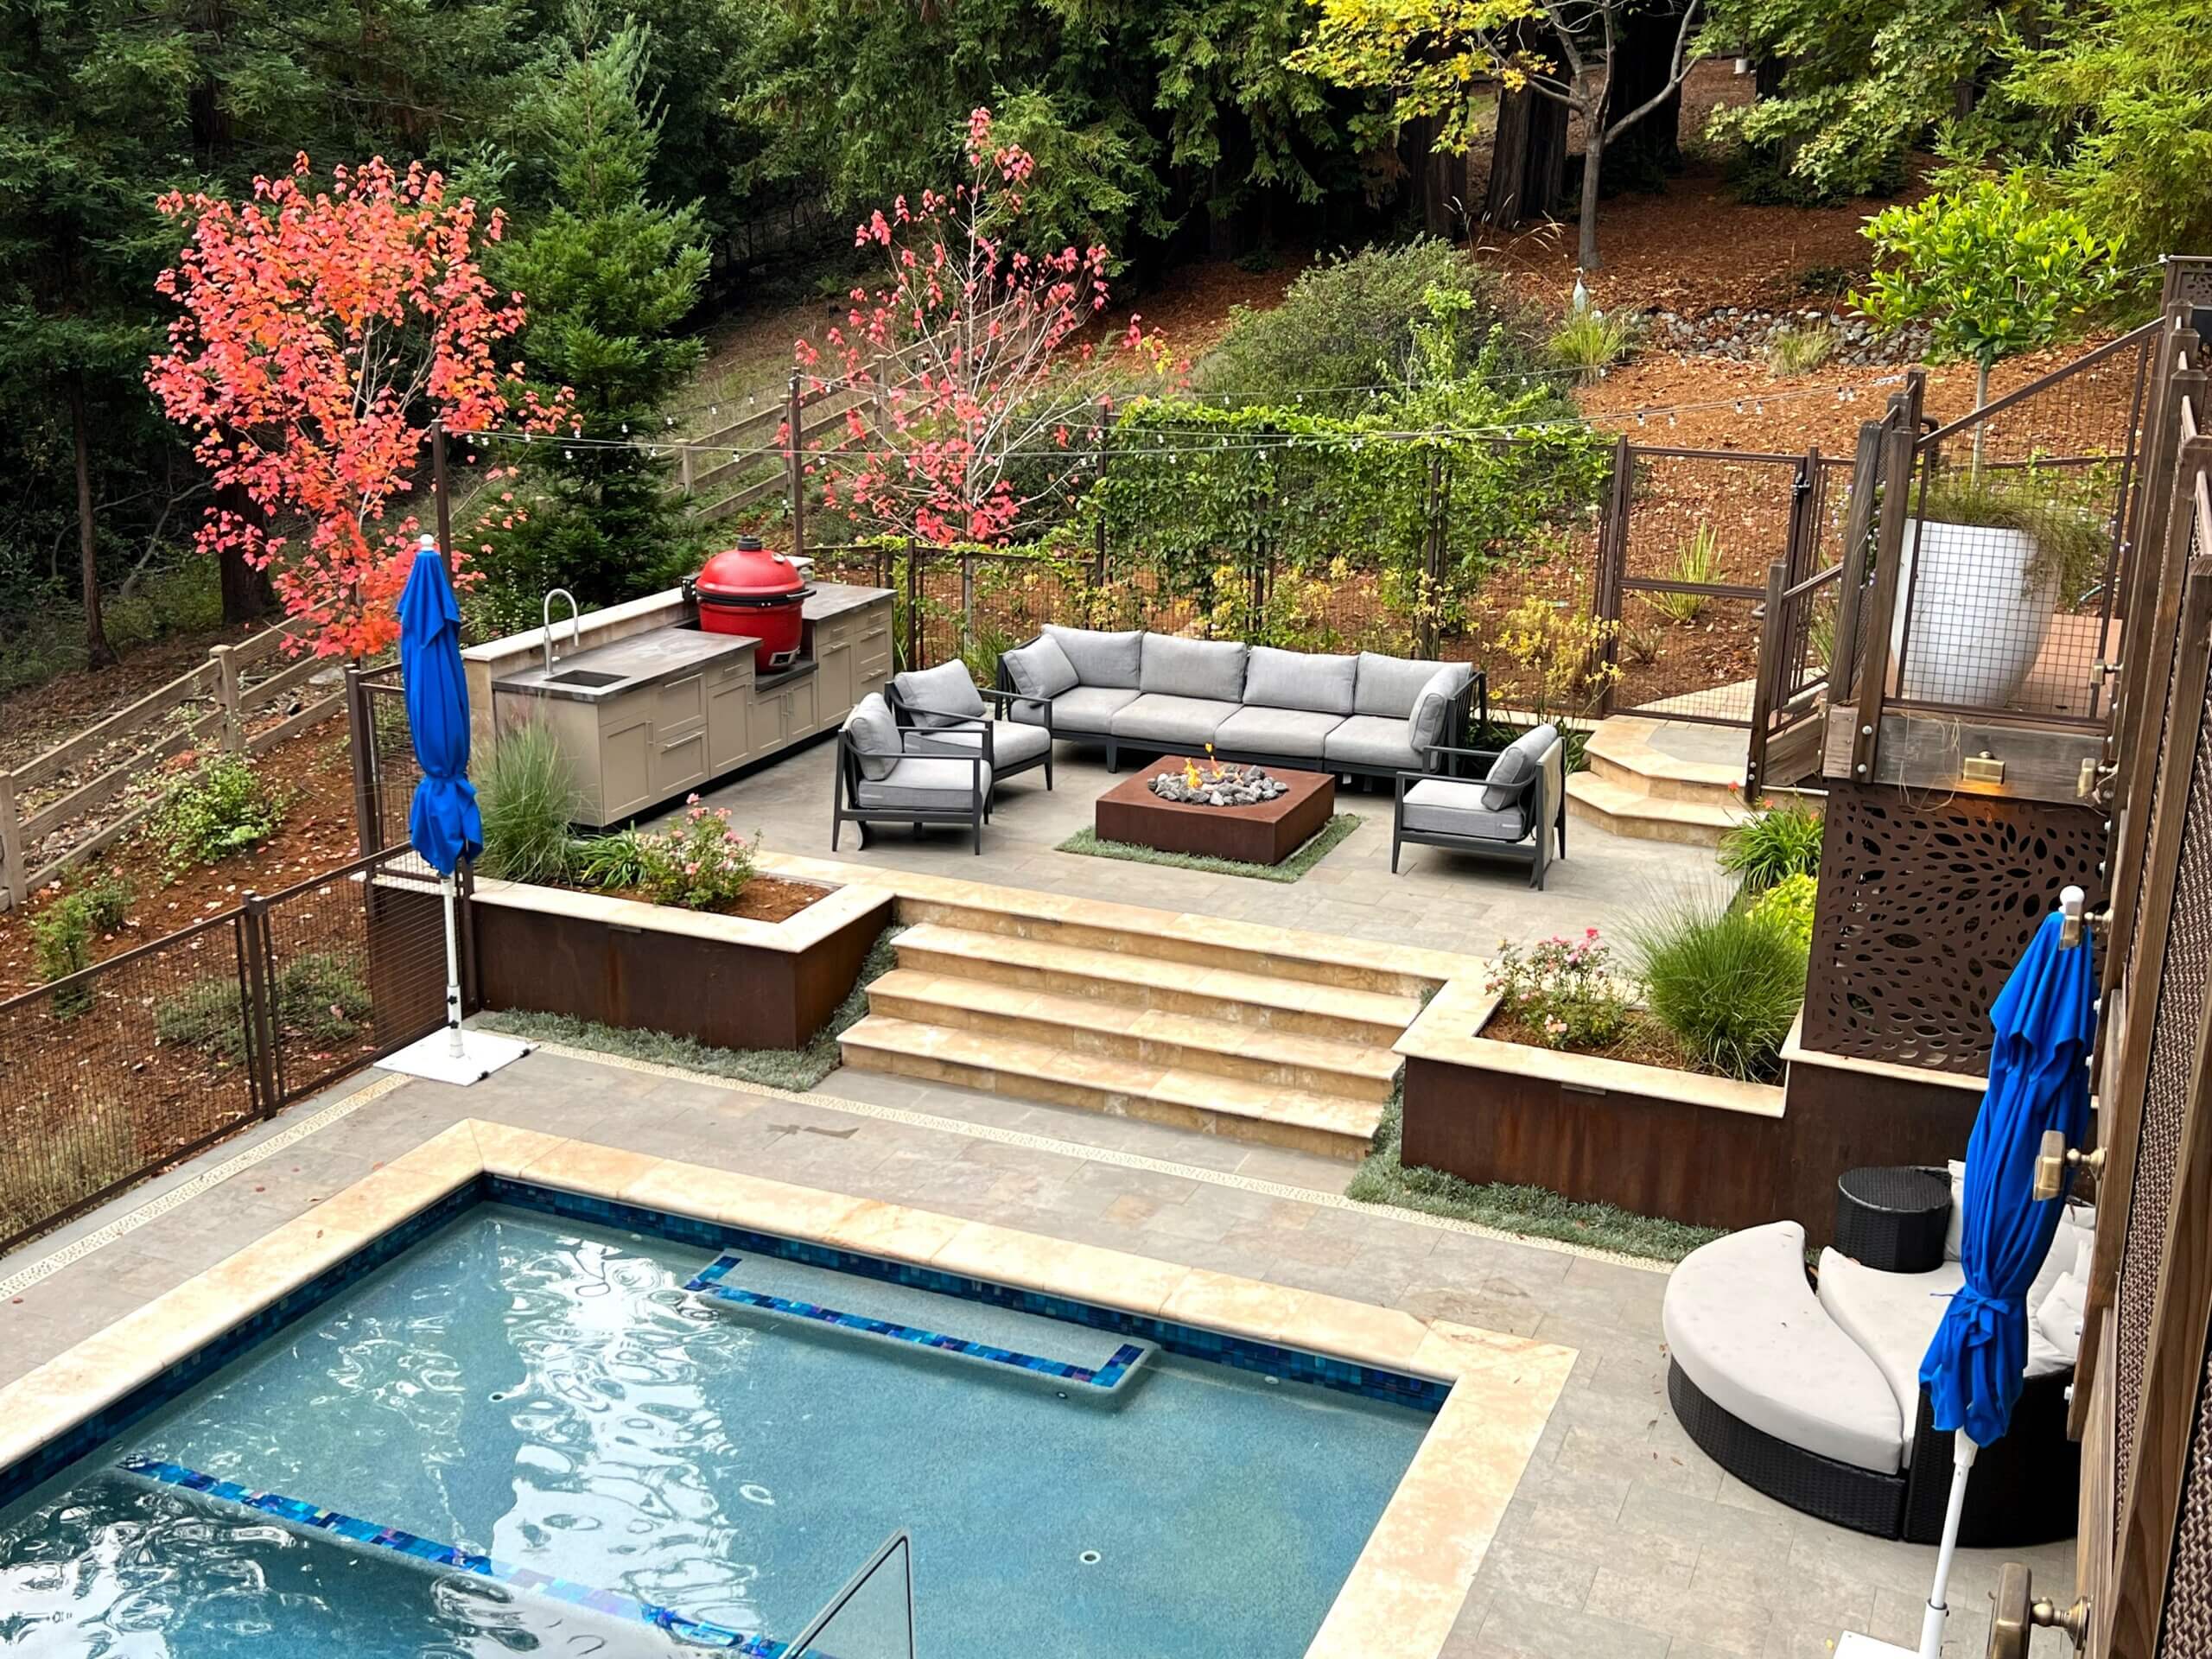 View of raised seating area with firepit and outdoor kitchen in steep sloped backyard in Santa Cruz